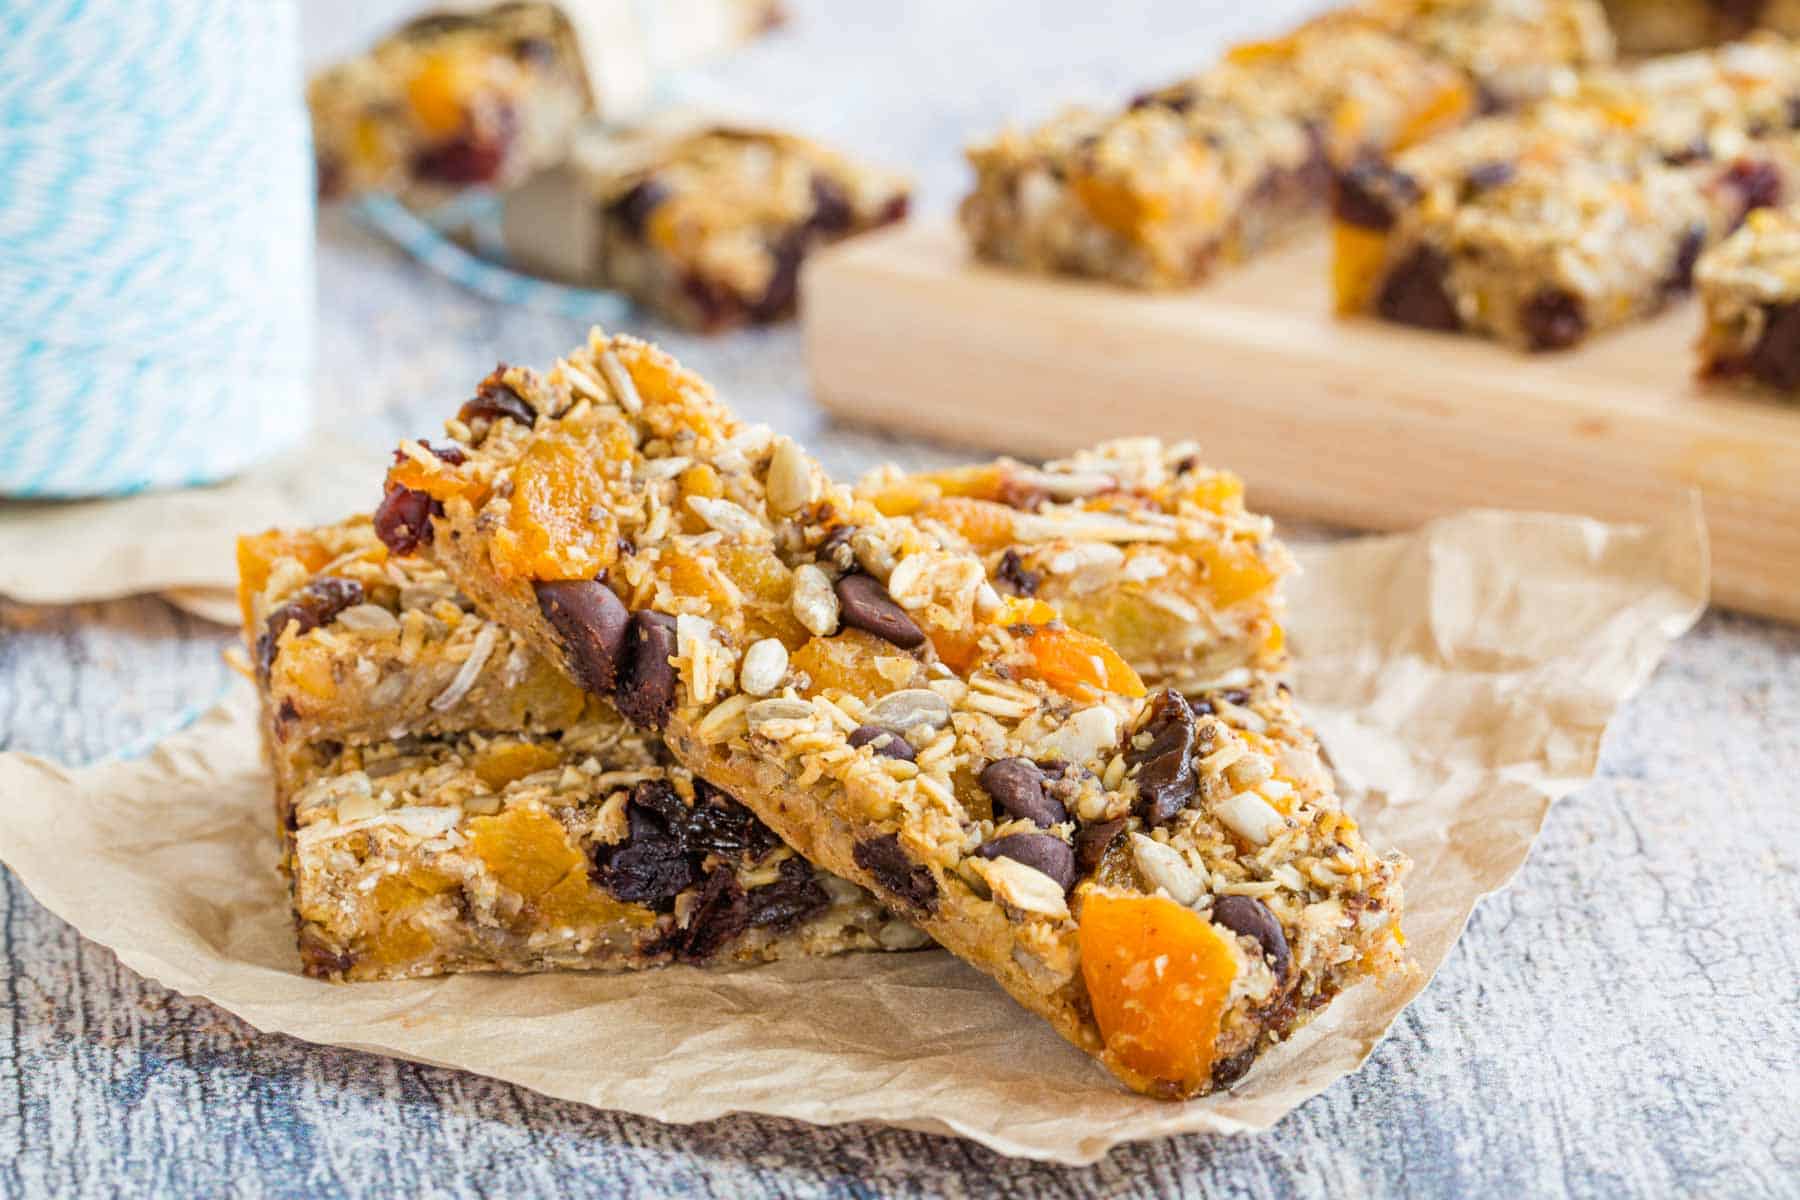 Allergy Friendly Trail Mix Granola Bars with oats, fried fruit, seeds, and chocolate chips